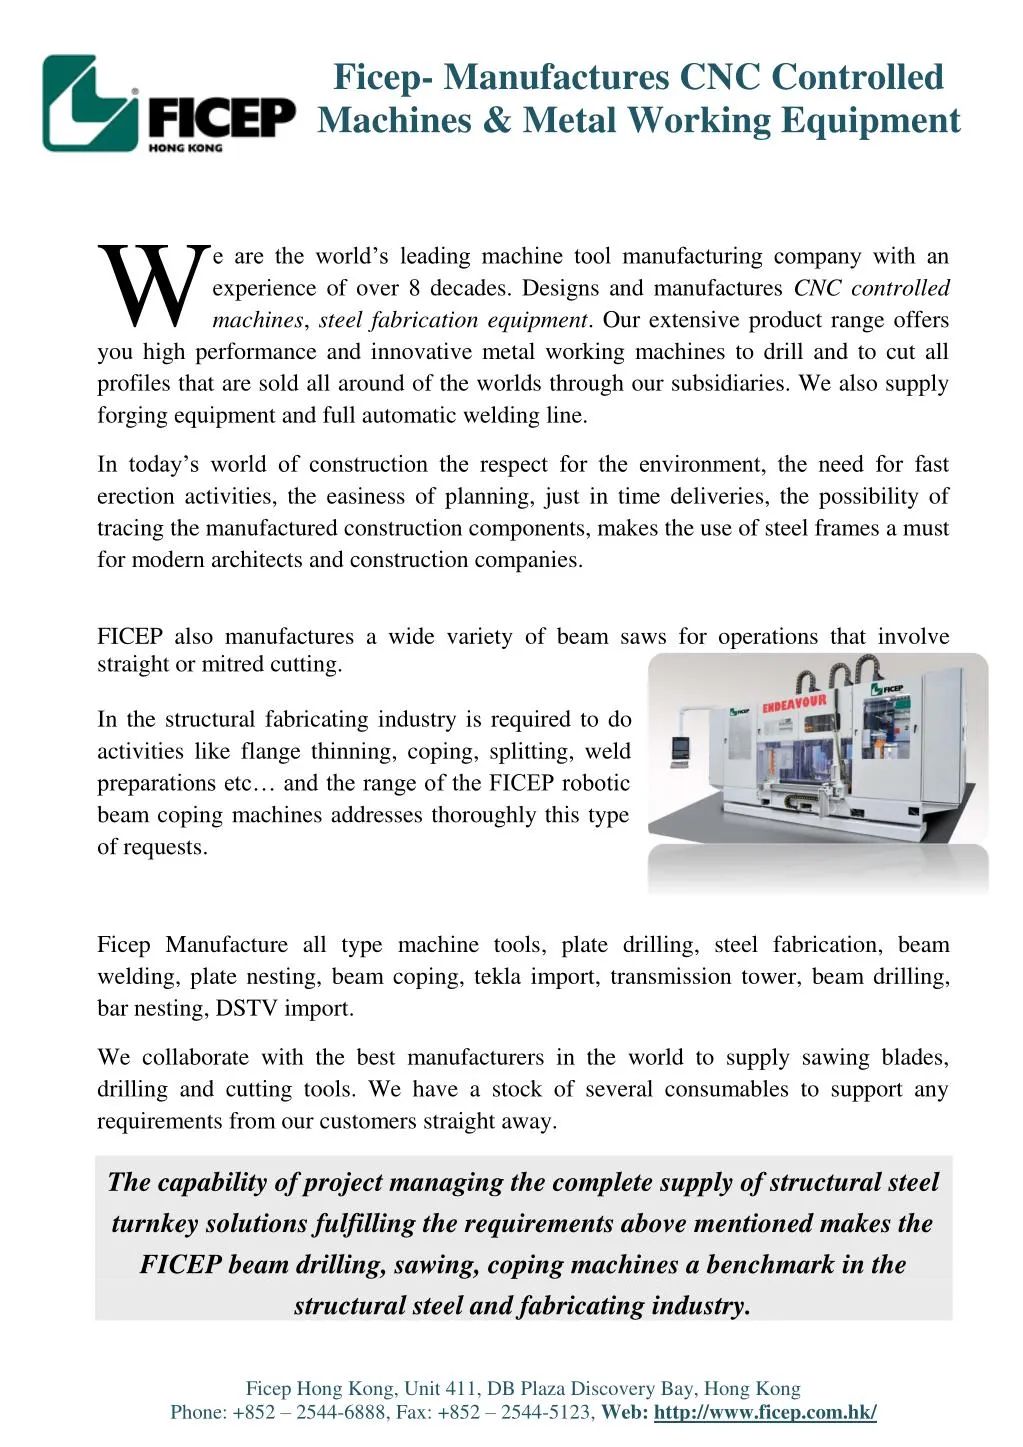 ficep manufactures cnc controlled machines metal